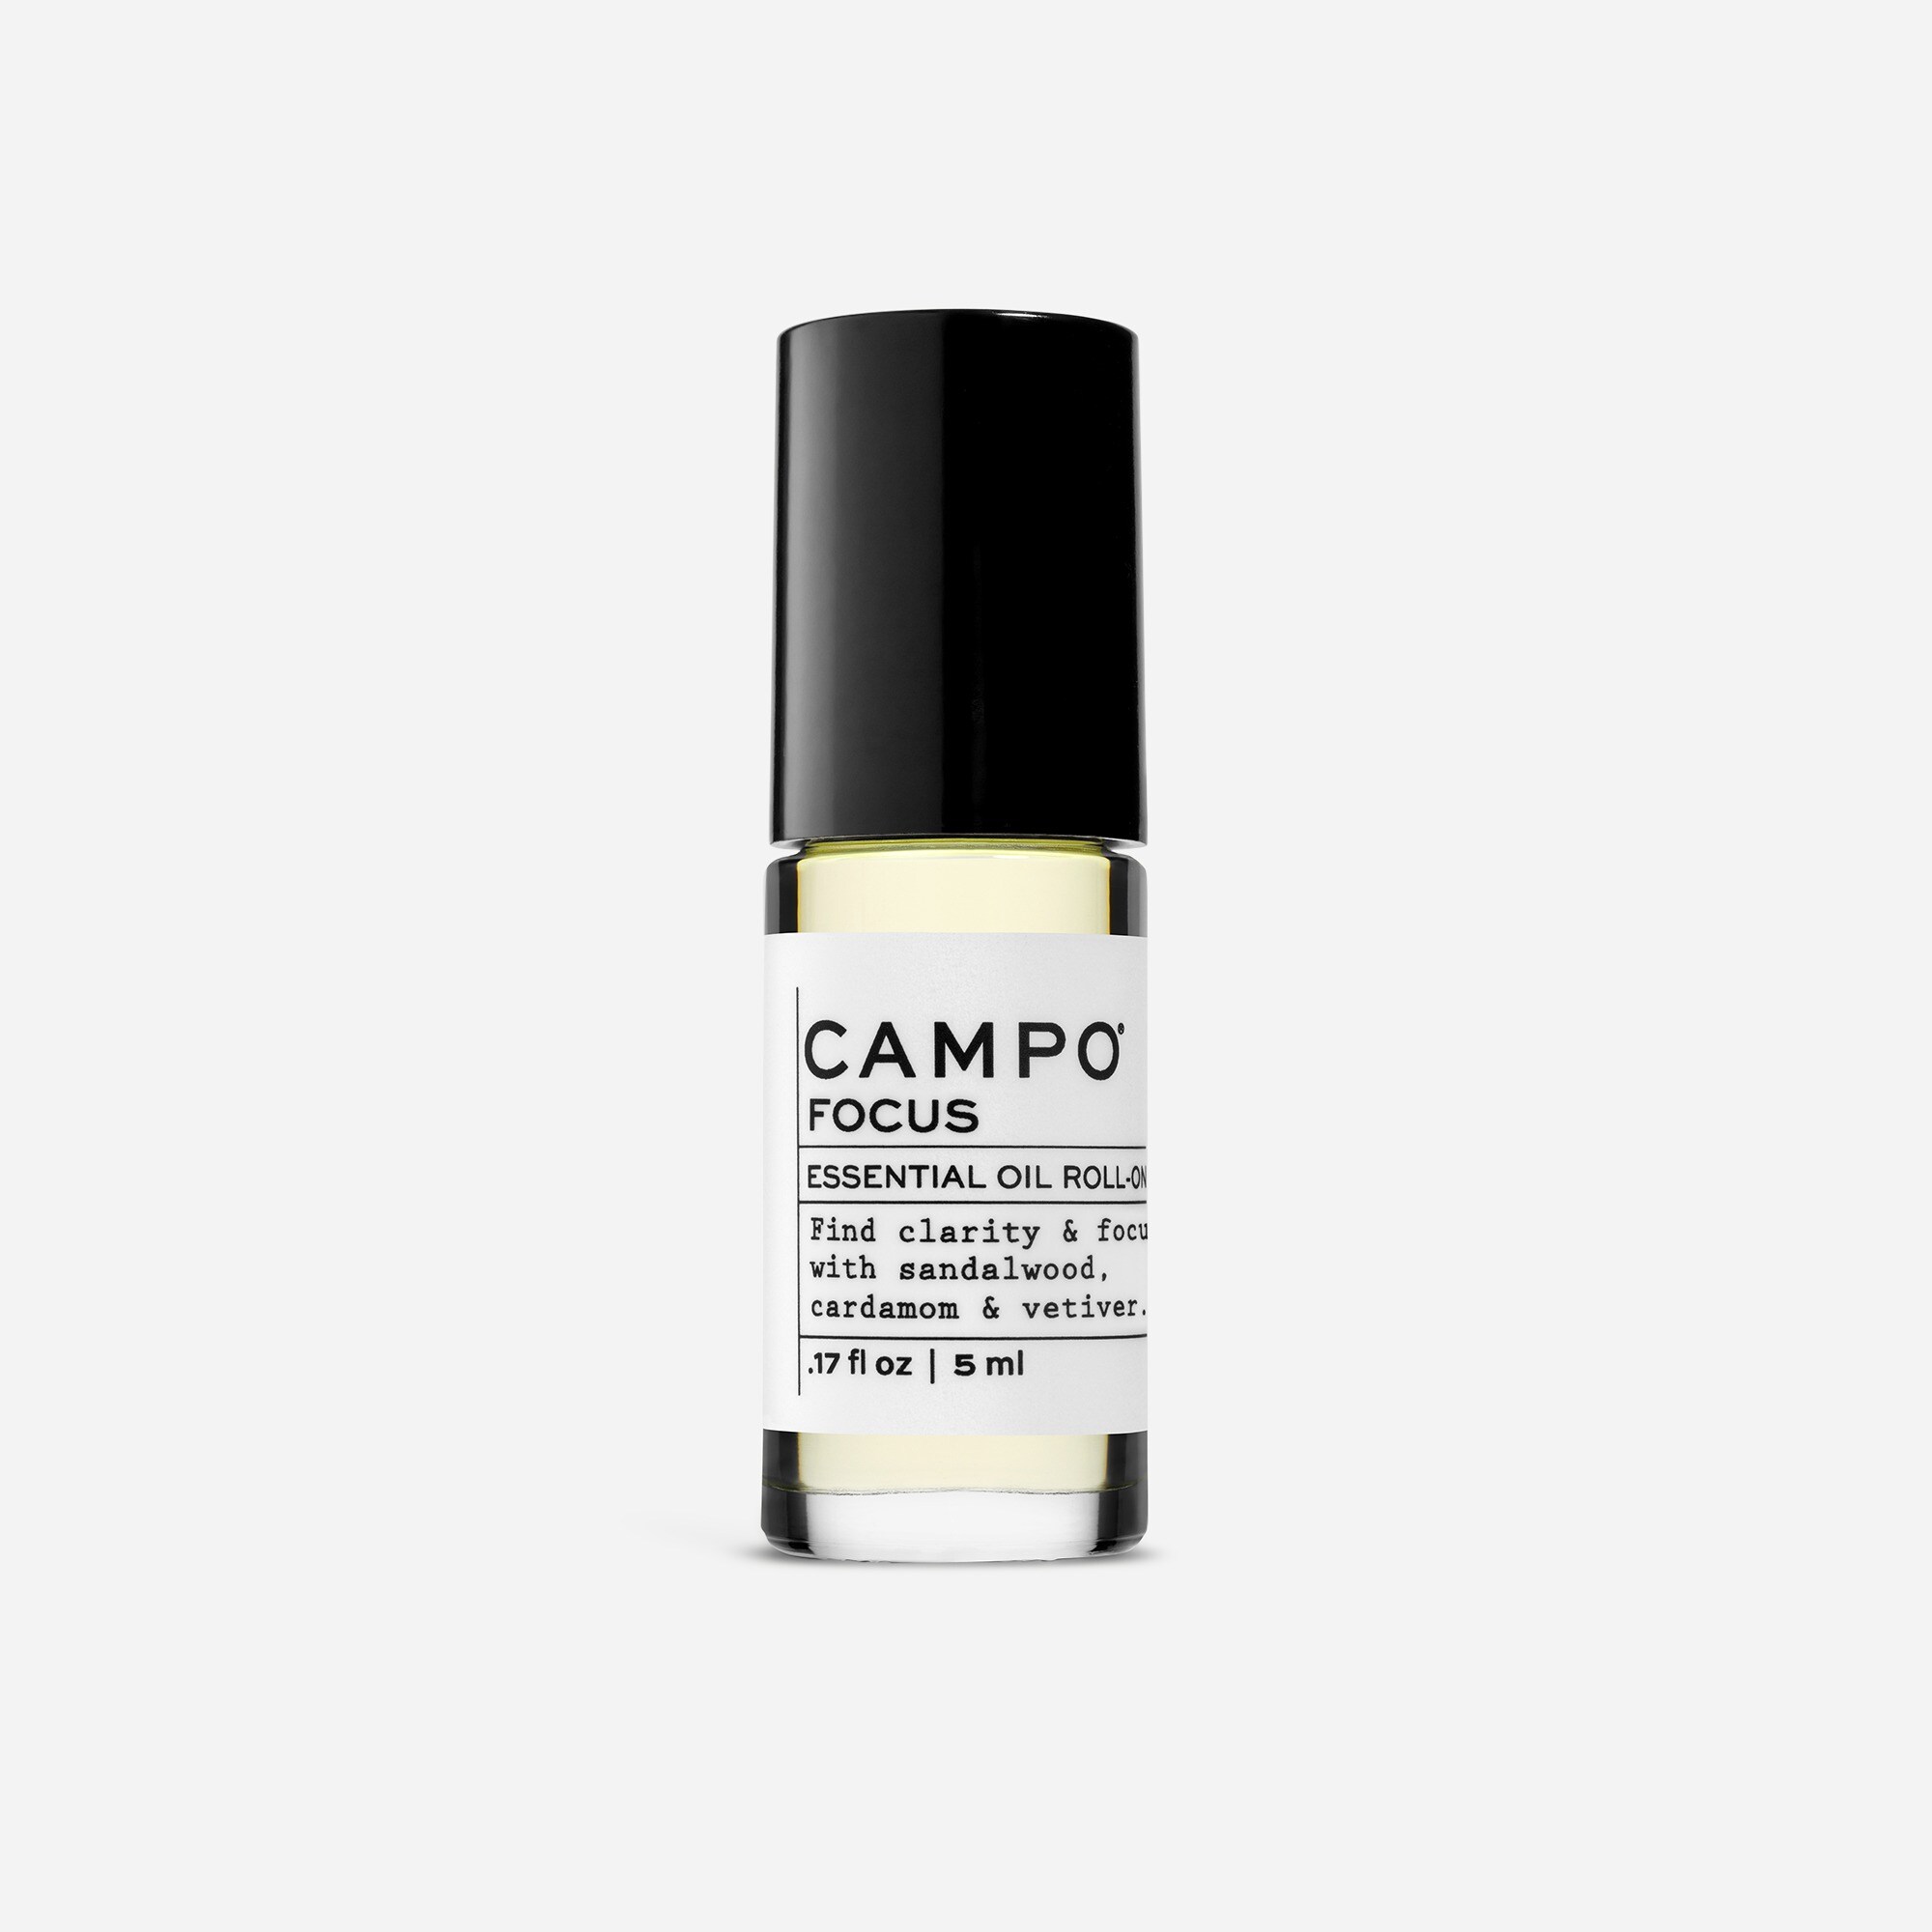  CAMPO® FOCUS roll-on oil